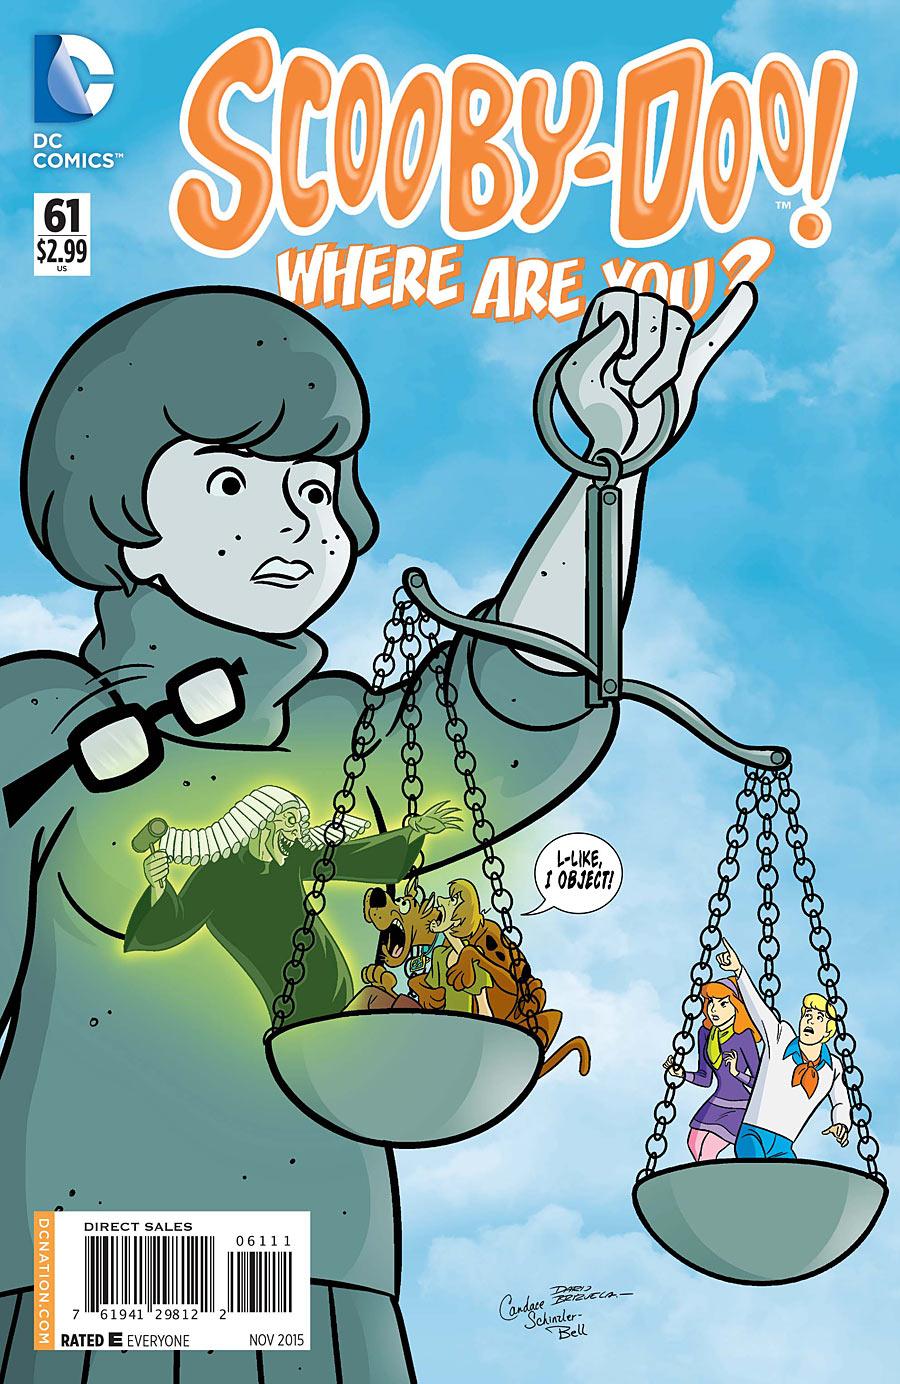 Scooby-Doo: Where Are You? Vol. 1 #61